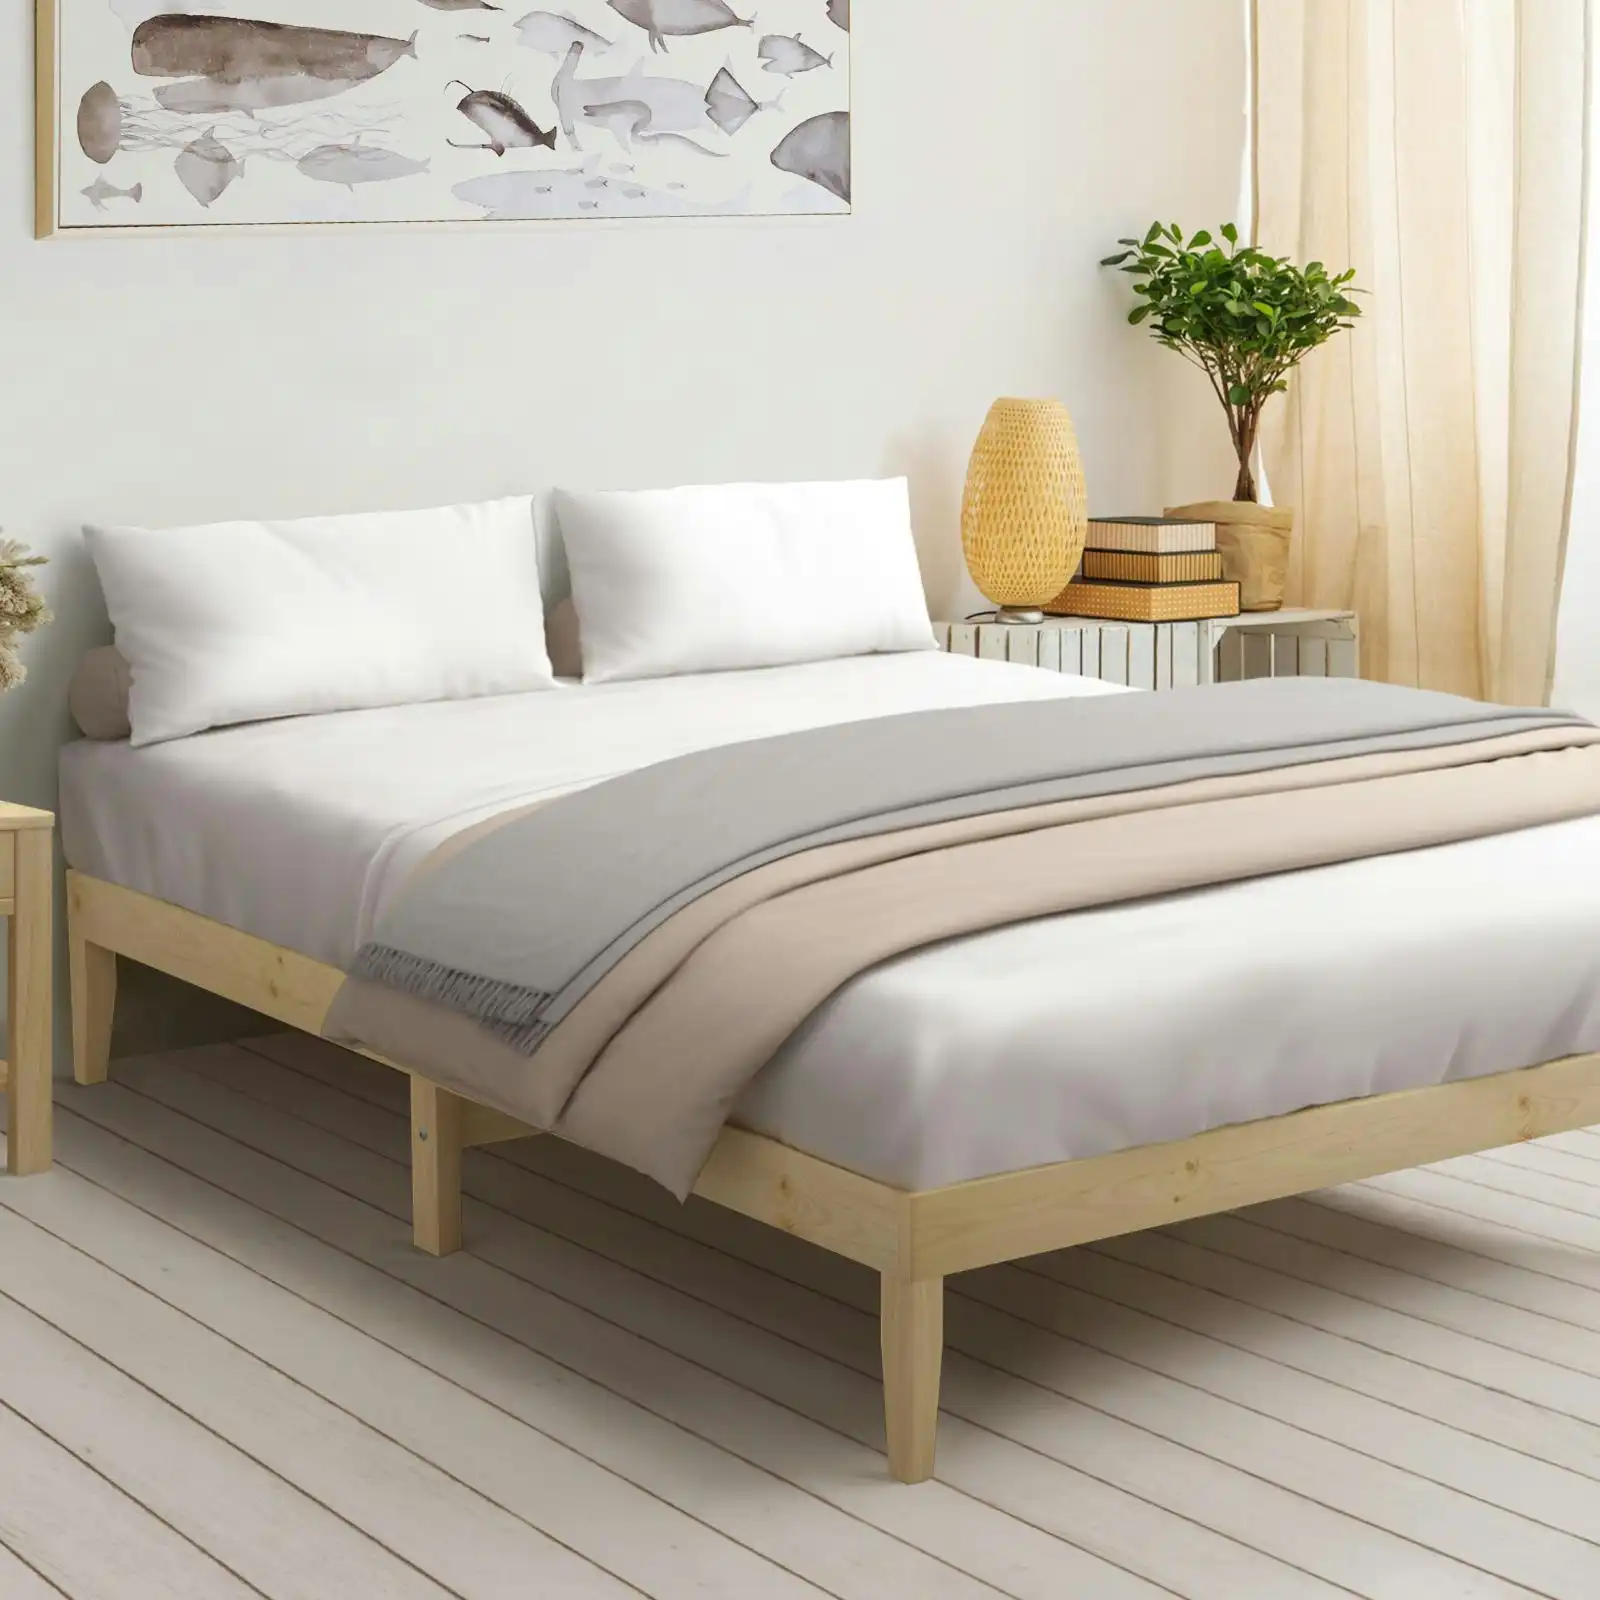 Oikiture Bed Frame Queen Size Wooden Timber Mattress Base Bedroom Furniture